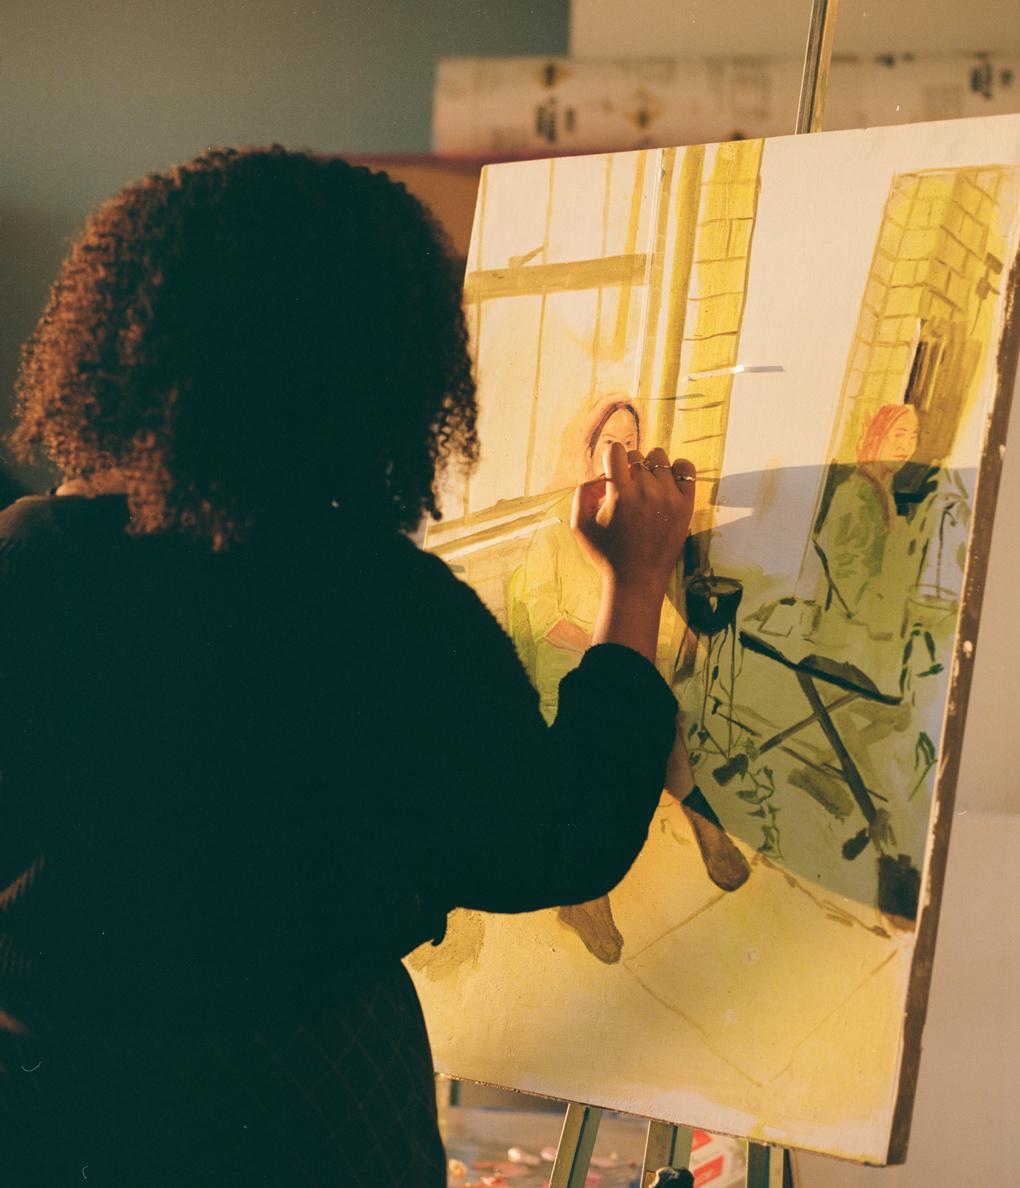 Photo of Lila Thomas from behind while she paints on a canvas